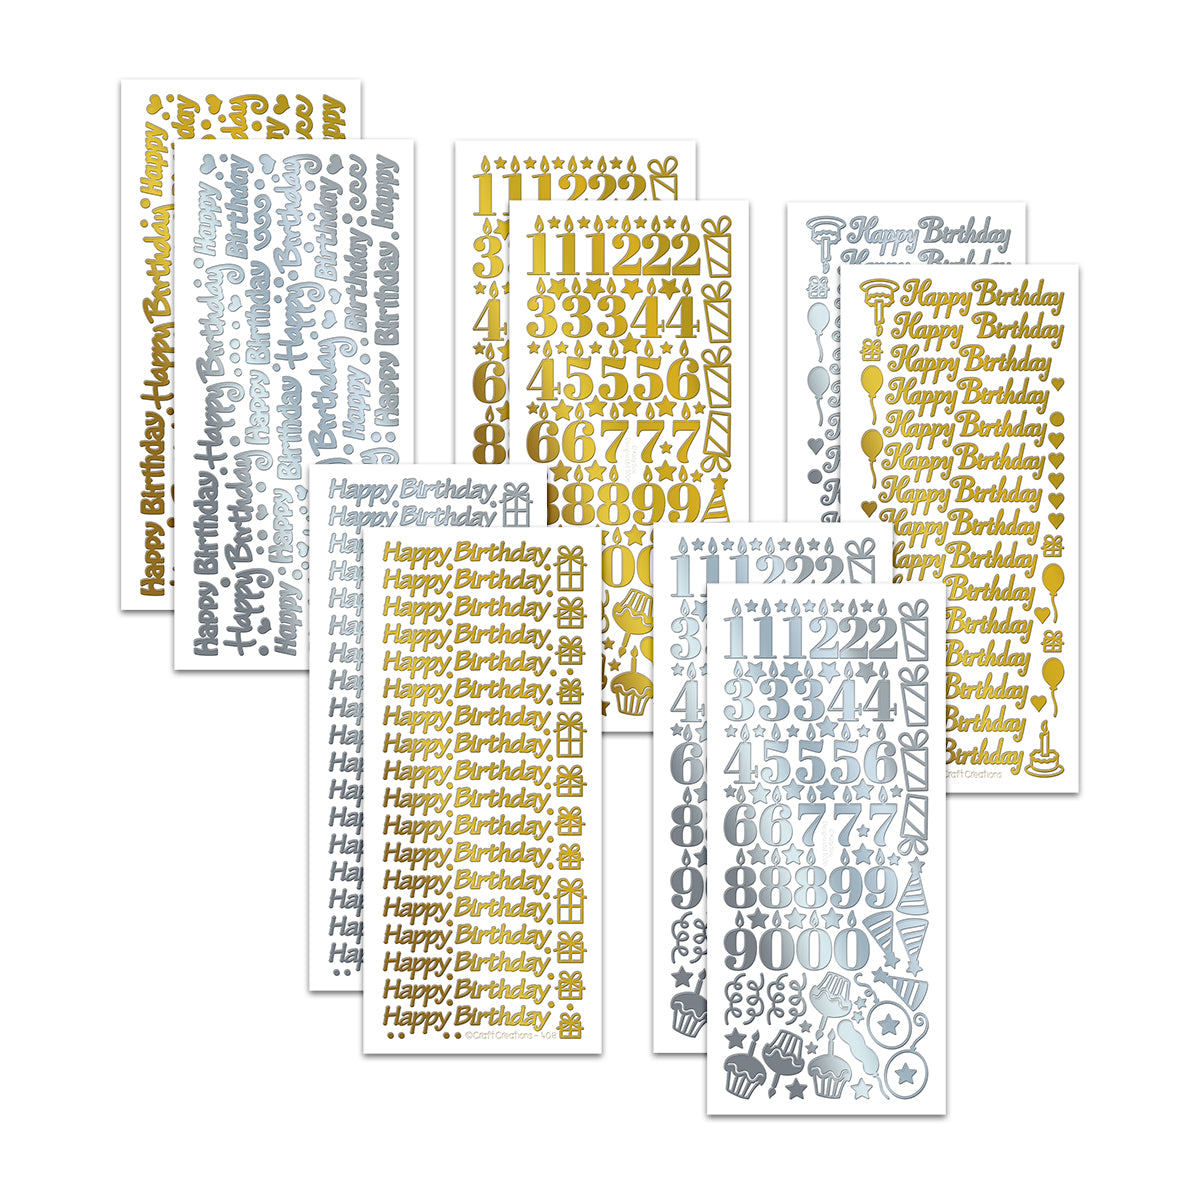 Peel Off Stickers – Mixed Packs